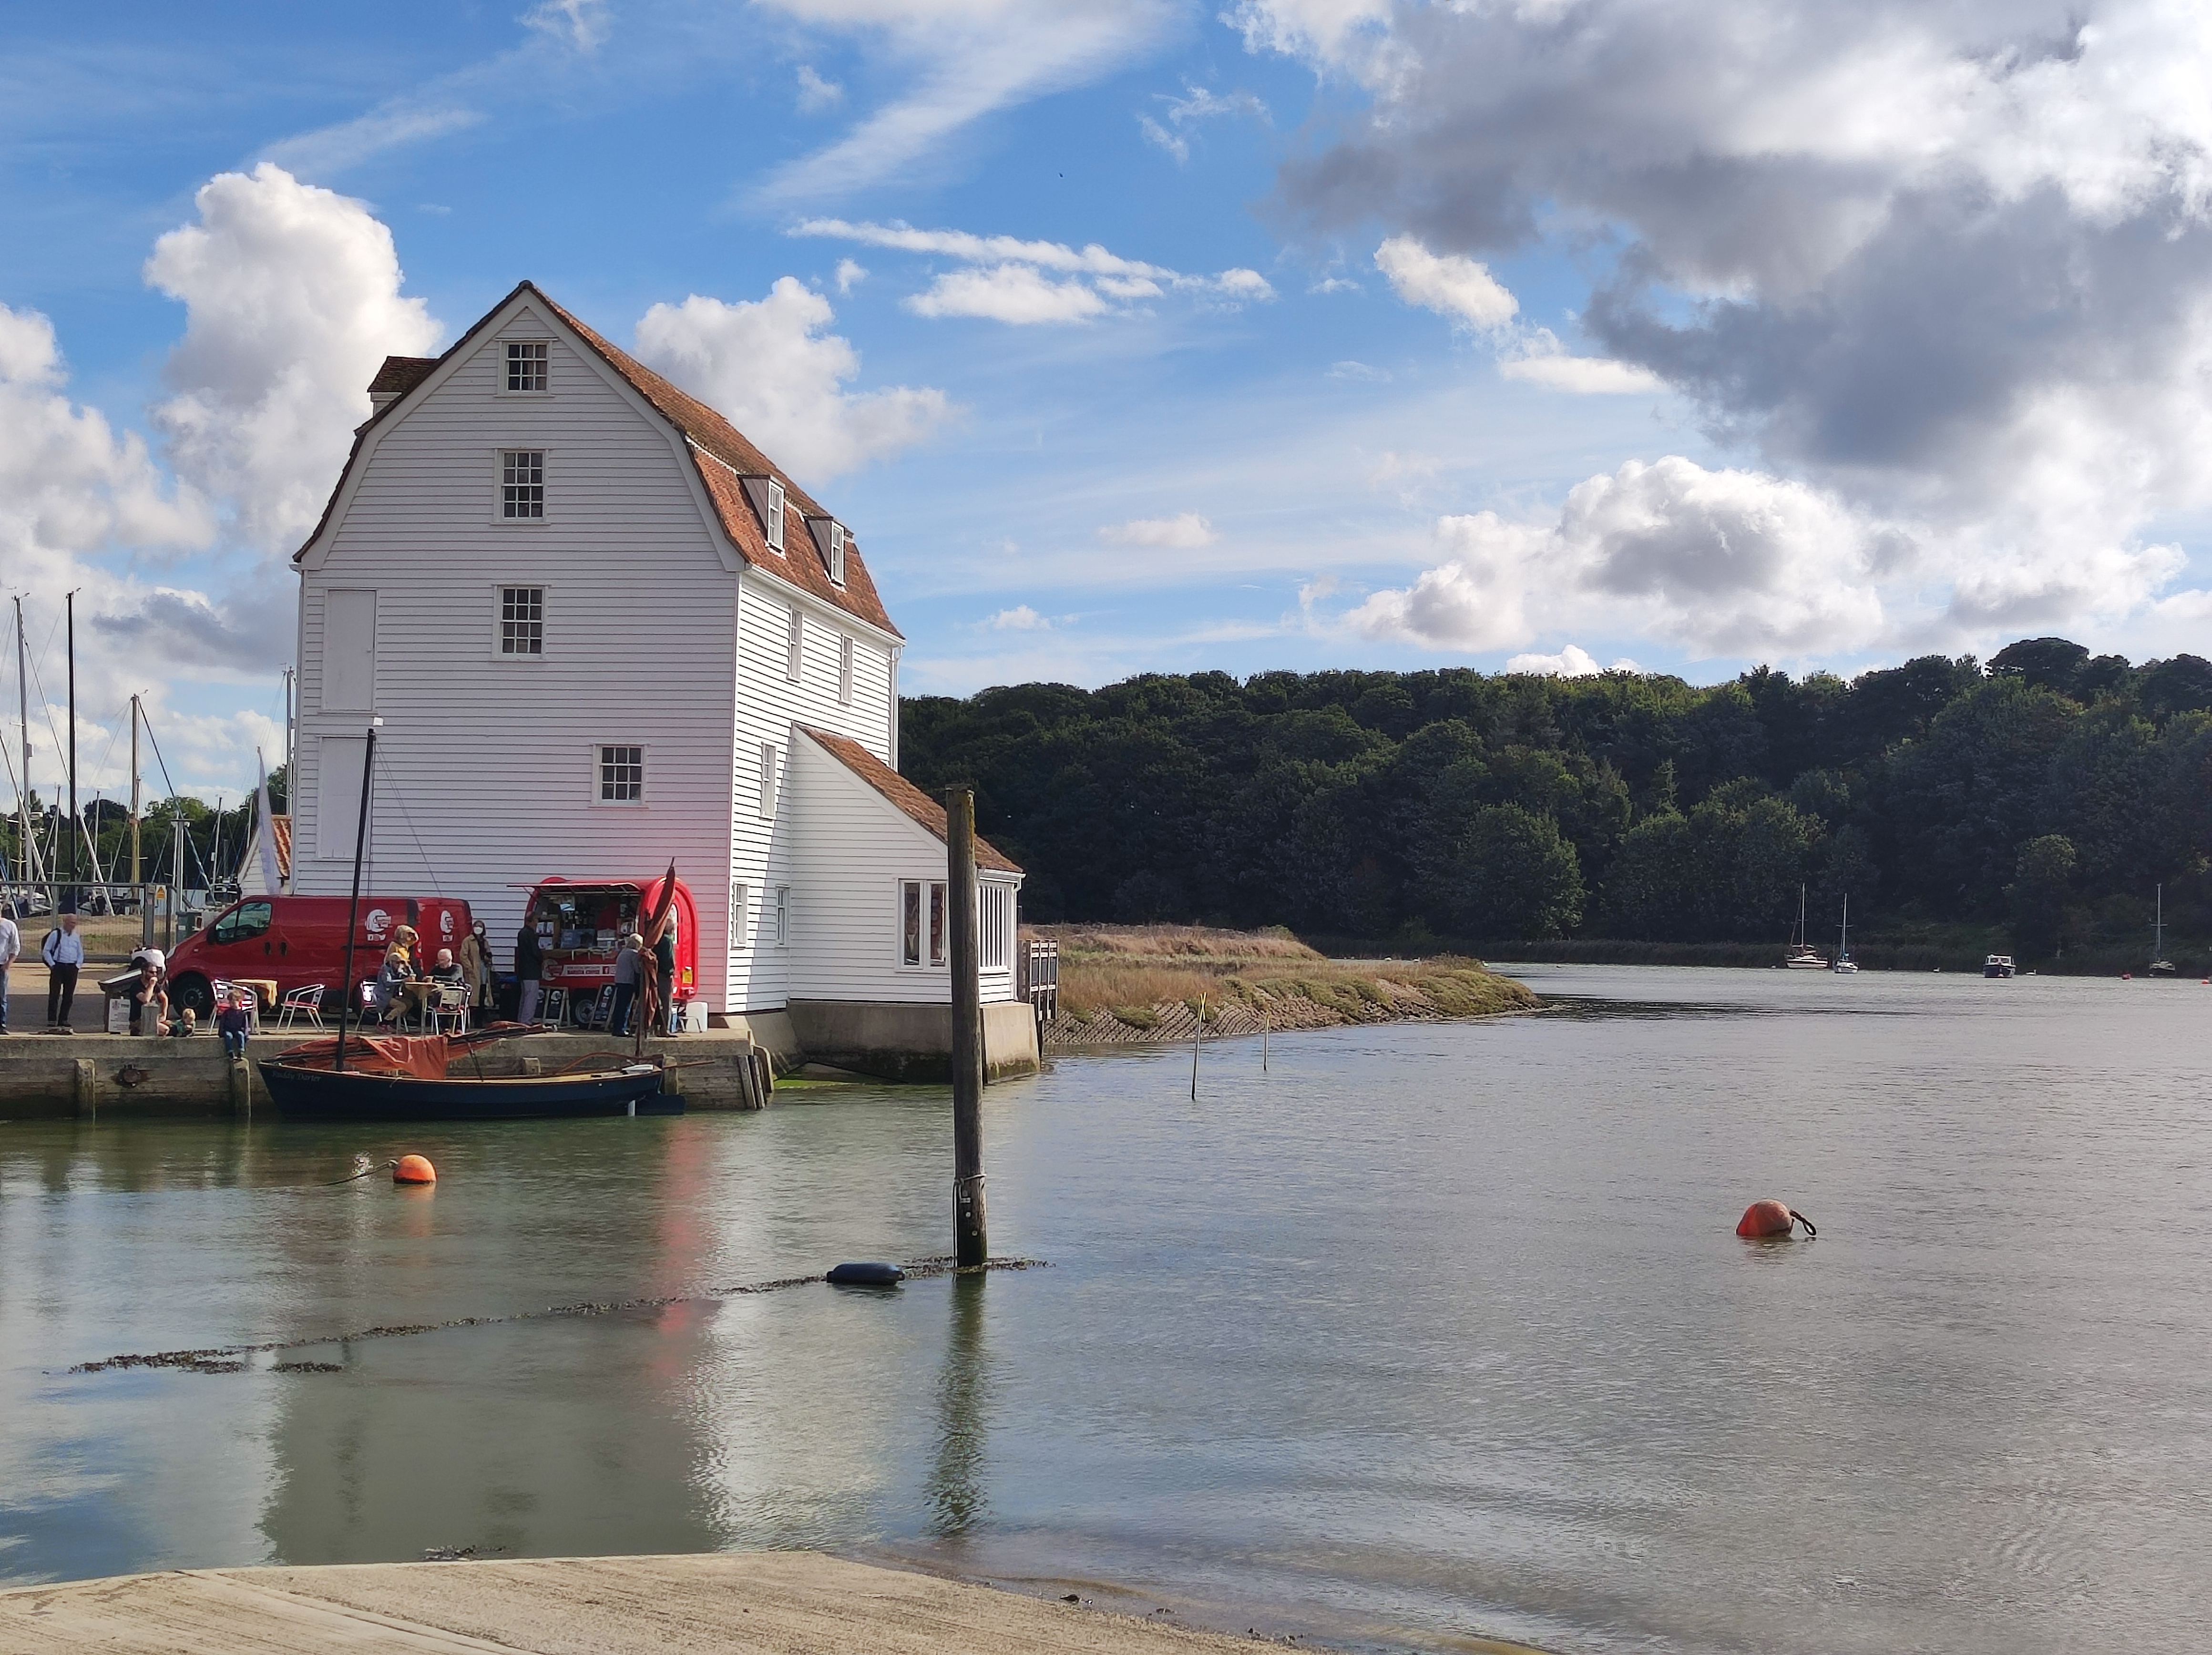 The Tide Mill museum